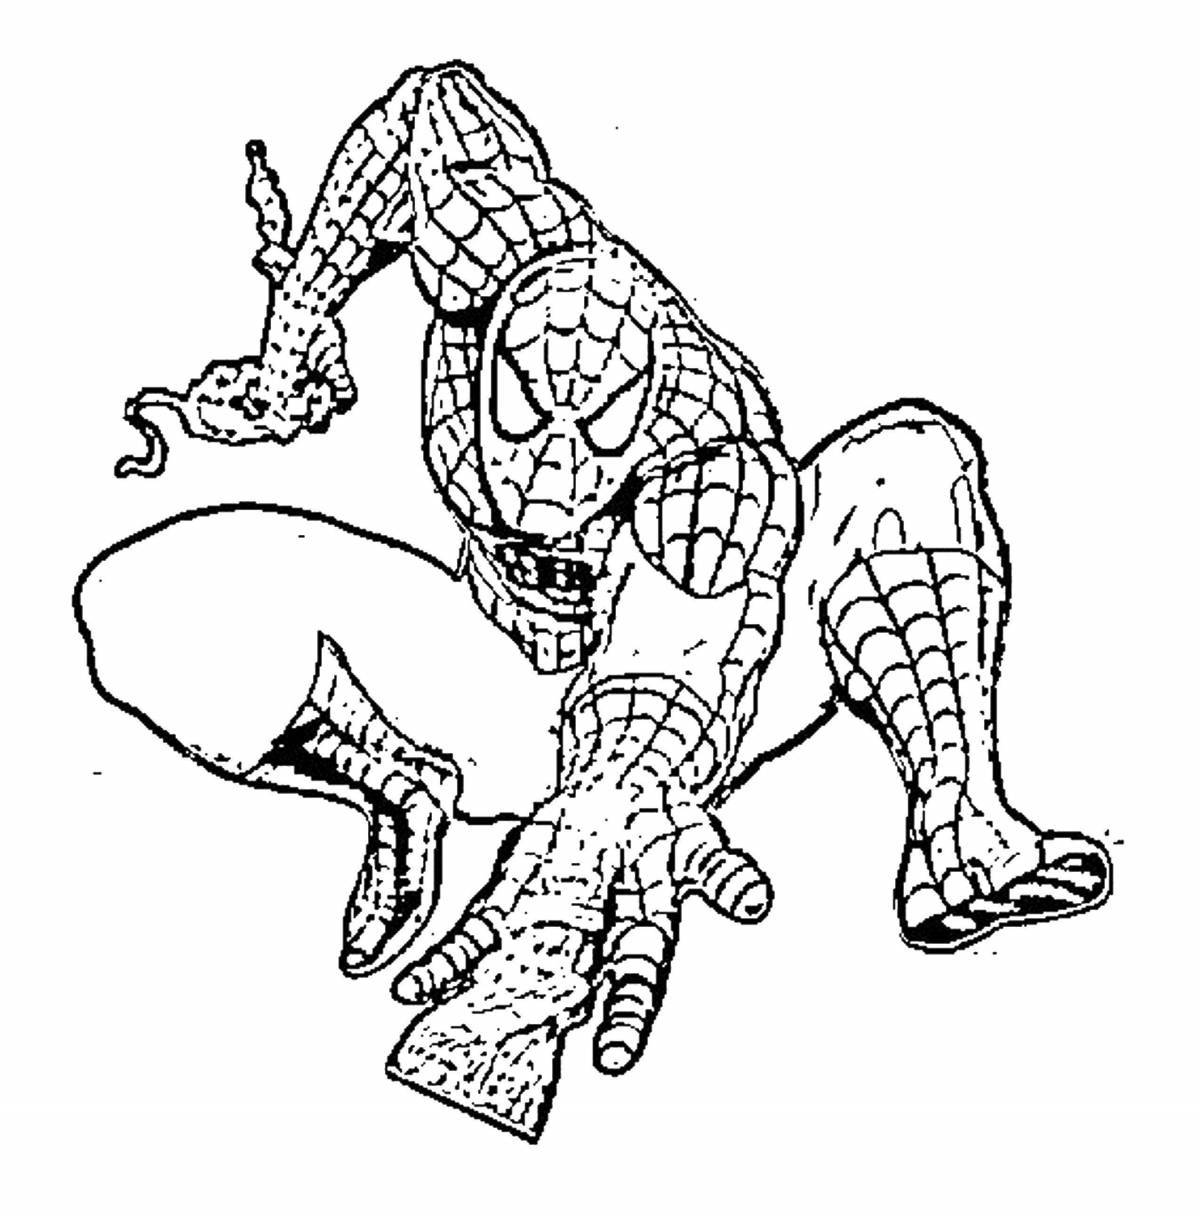 Spider-man funny coloring book for boys